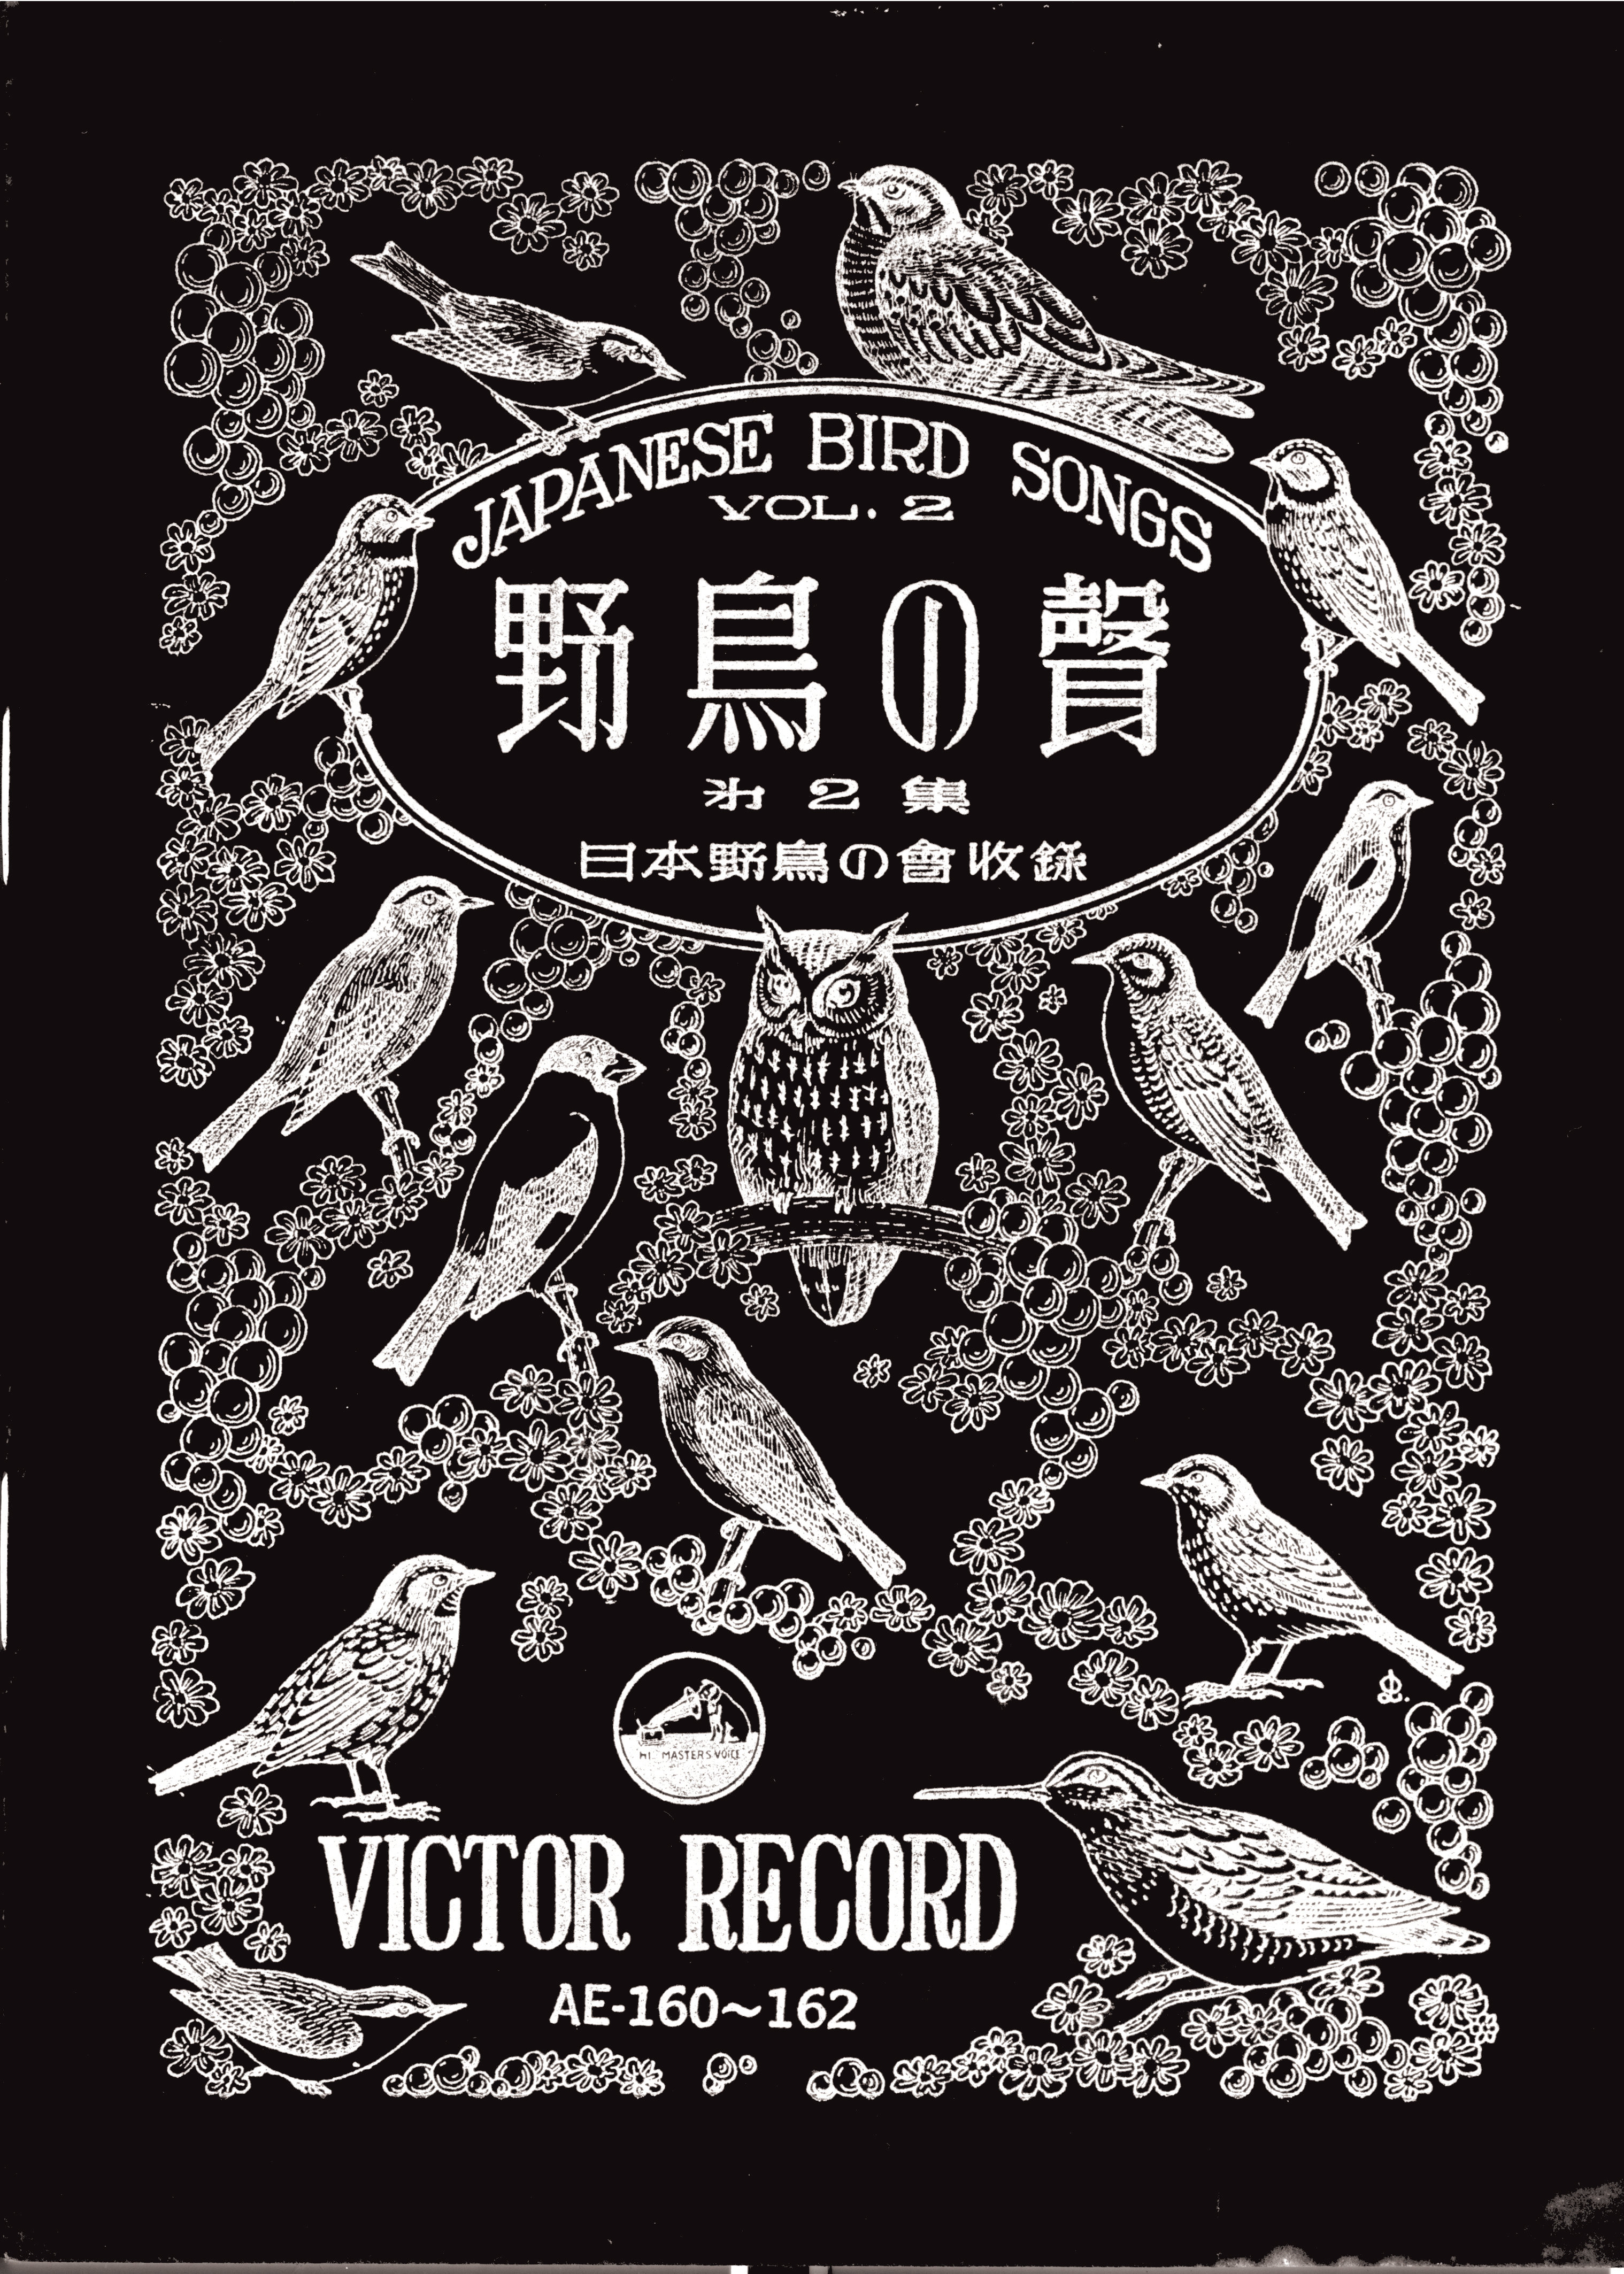 A title page from Japanese Bird Songs